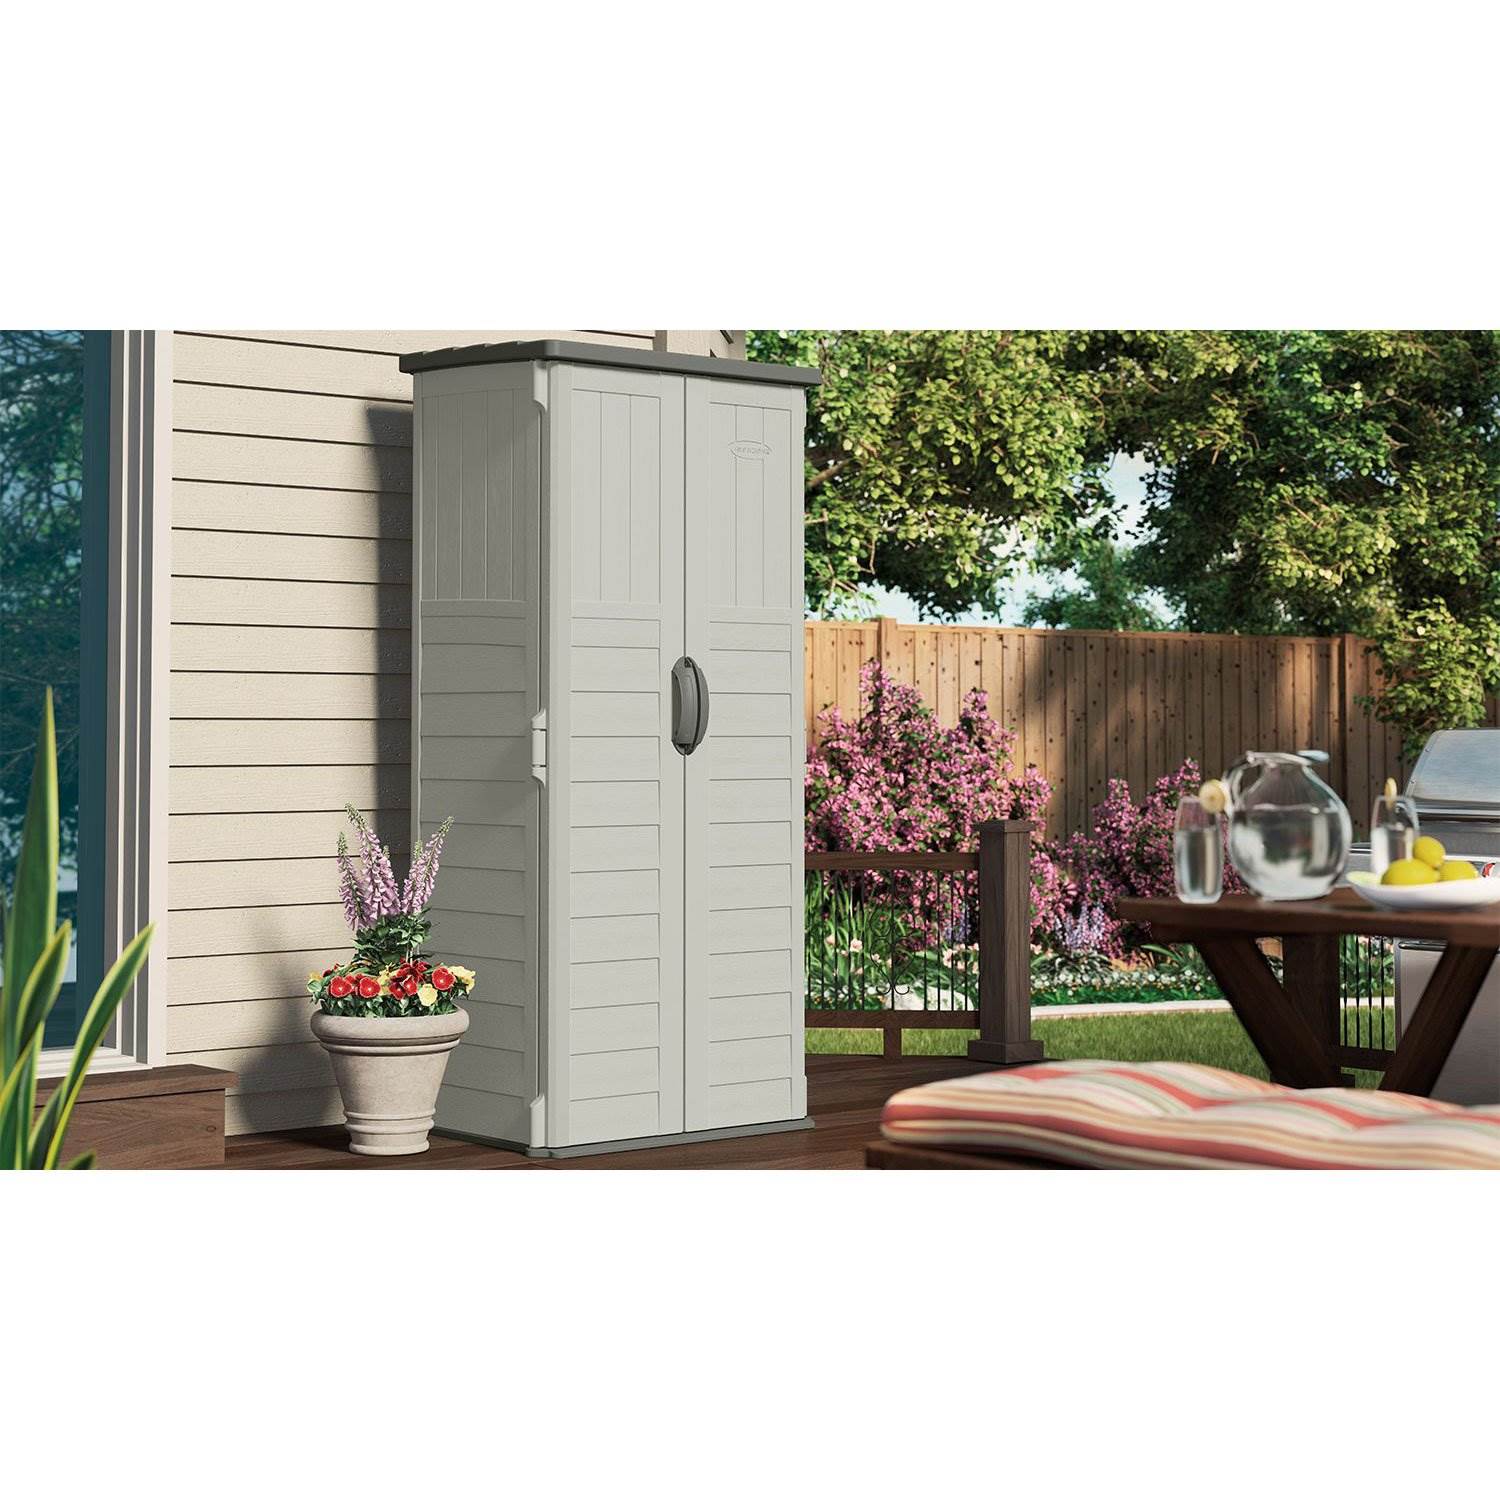 Suncast BMS1250 Resin Vertical Storage Shed, 22 Cubic feet - image 3 of 5